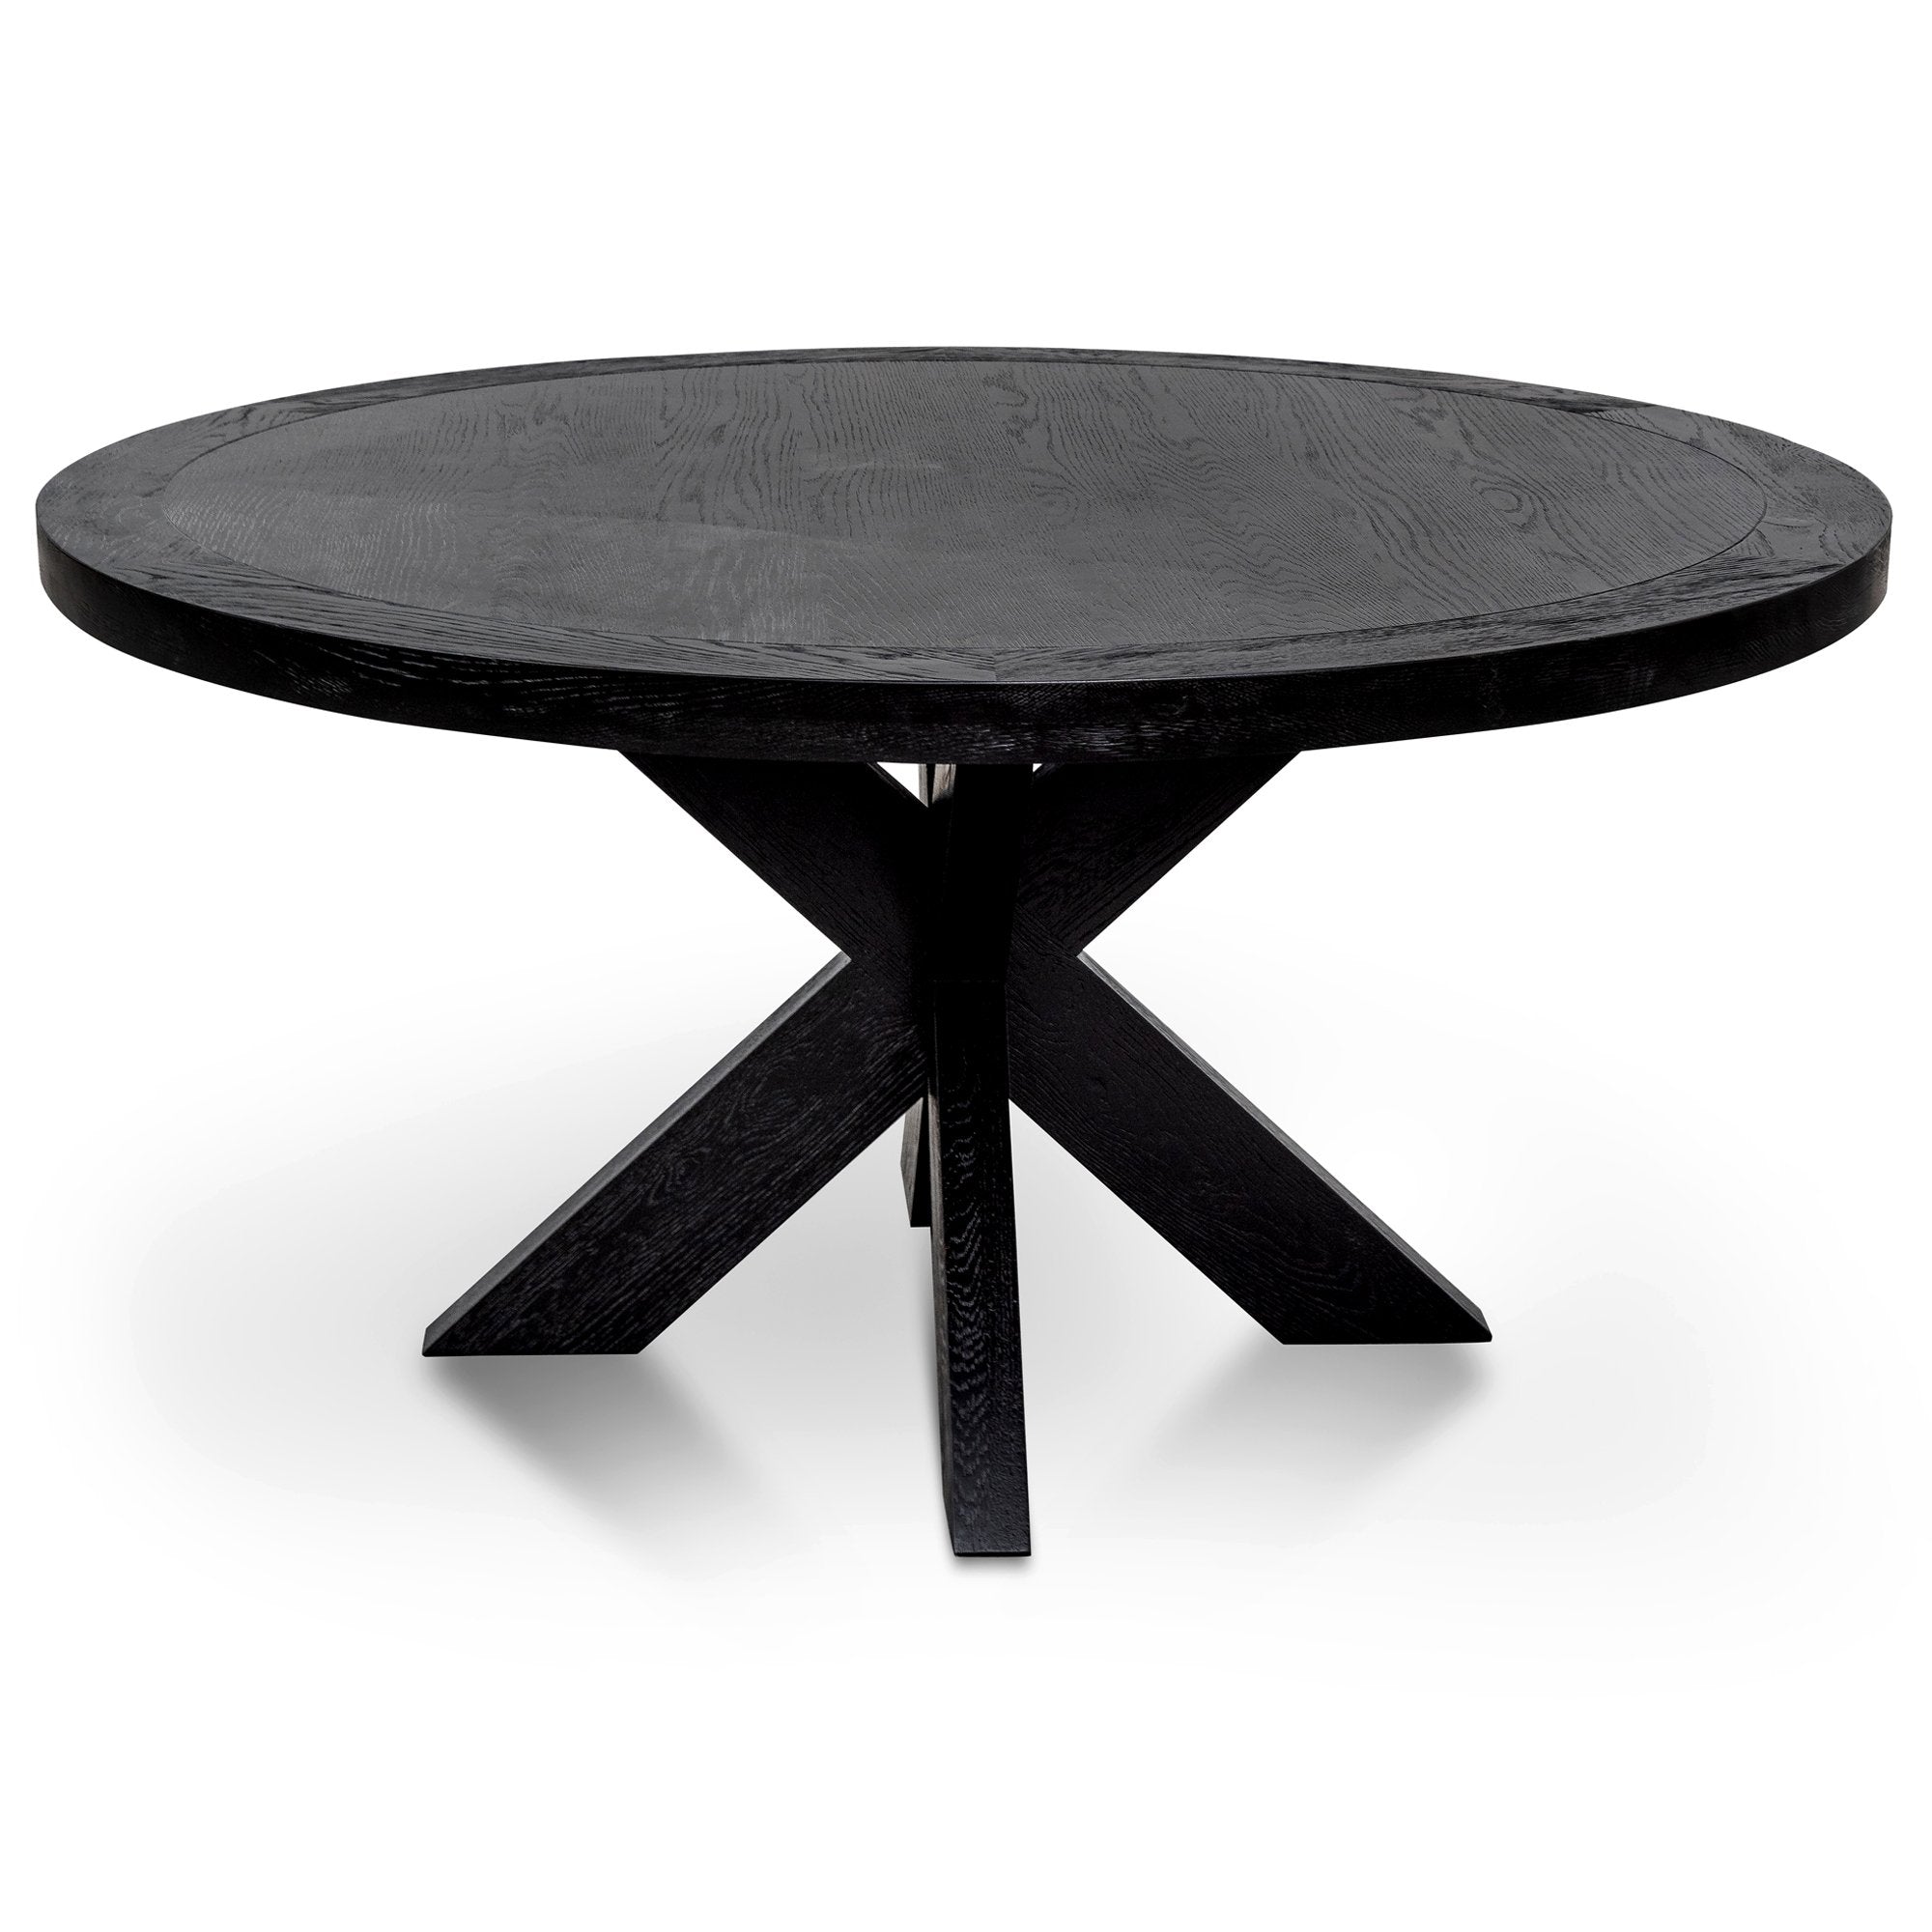 Simon1.5m Round Wooden Dining Table - Full Black - Dining Tables